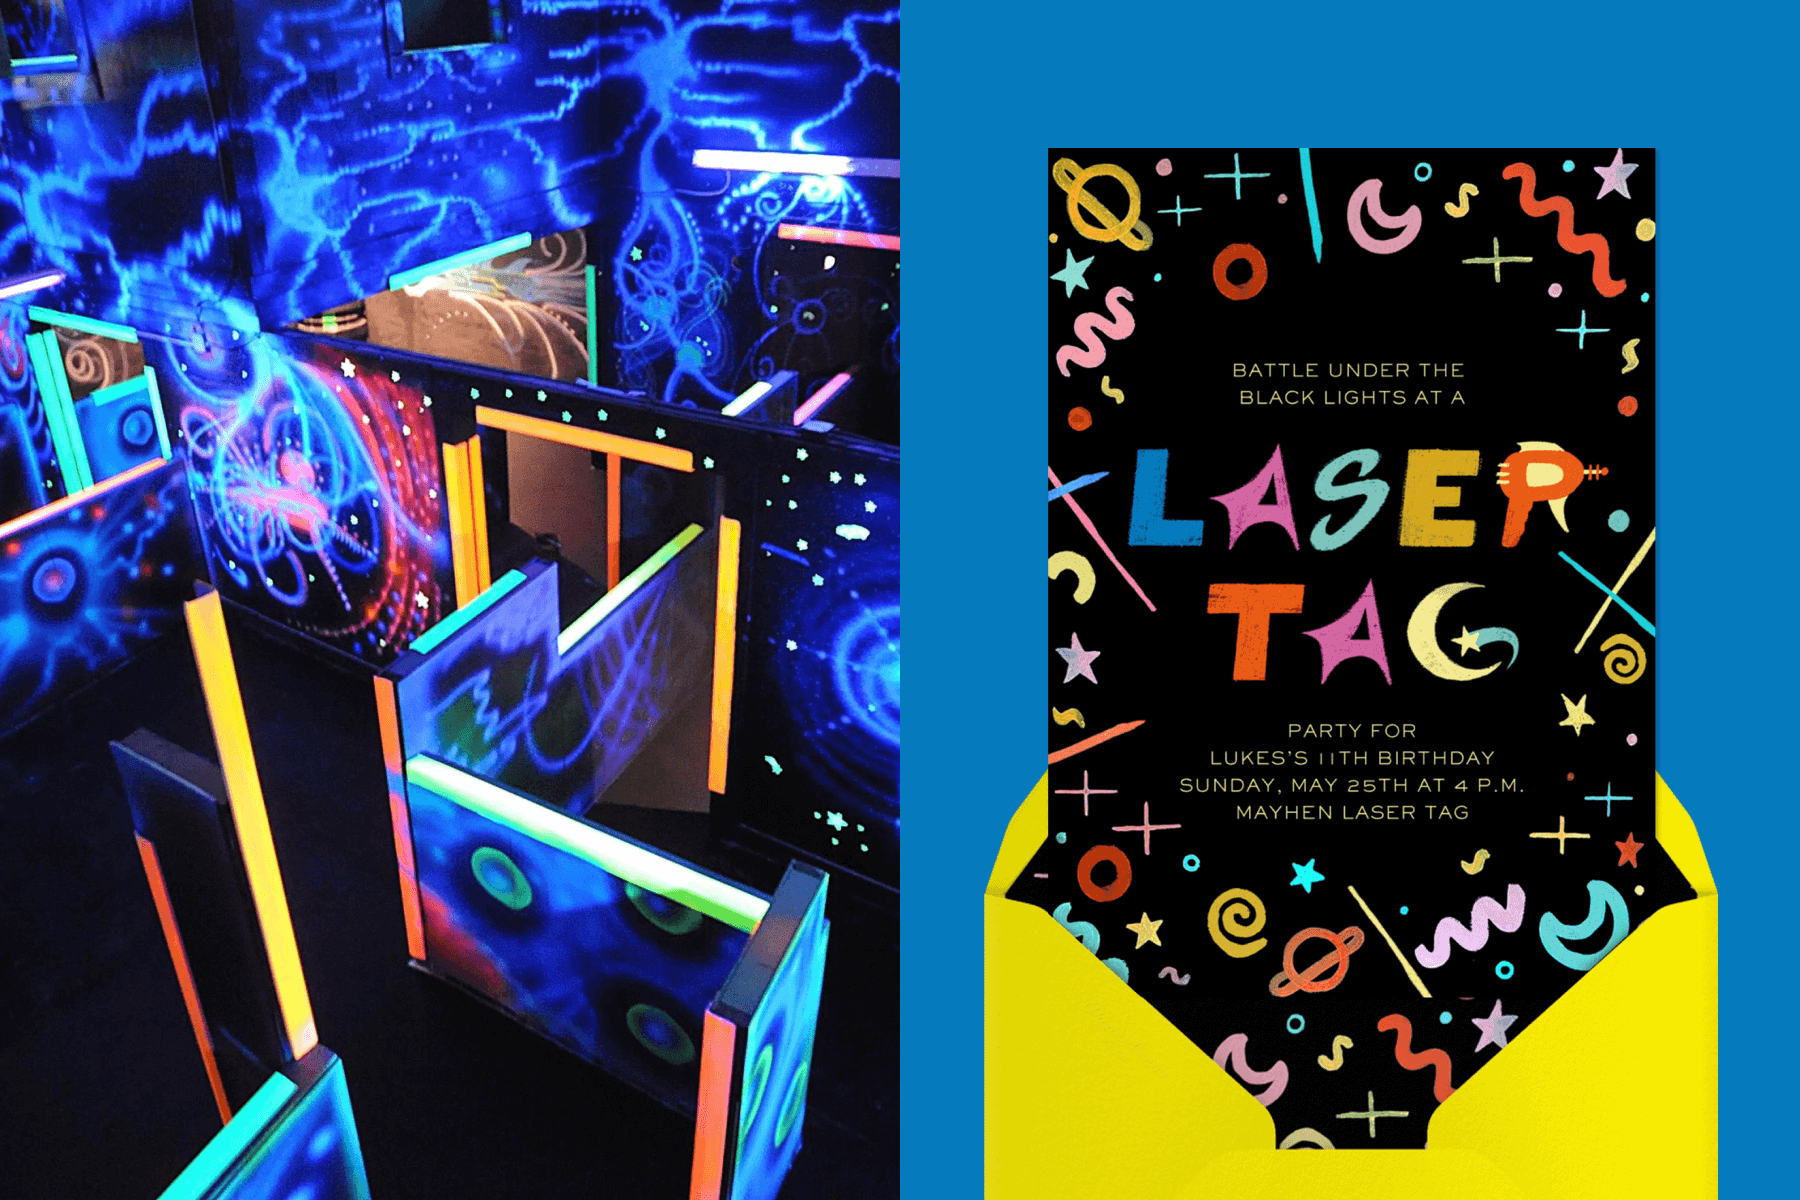 Left: A laser tag course with neon and black lights. Right: A black laser tag invitation with colorful intergalactic squiggles along the border.